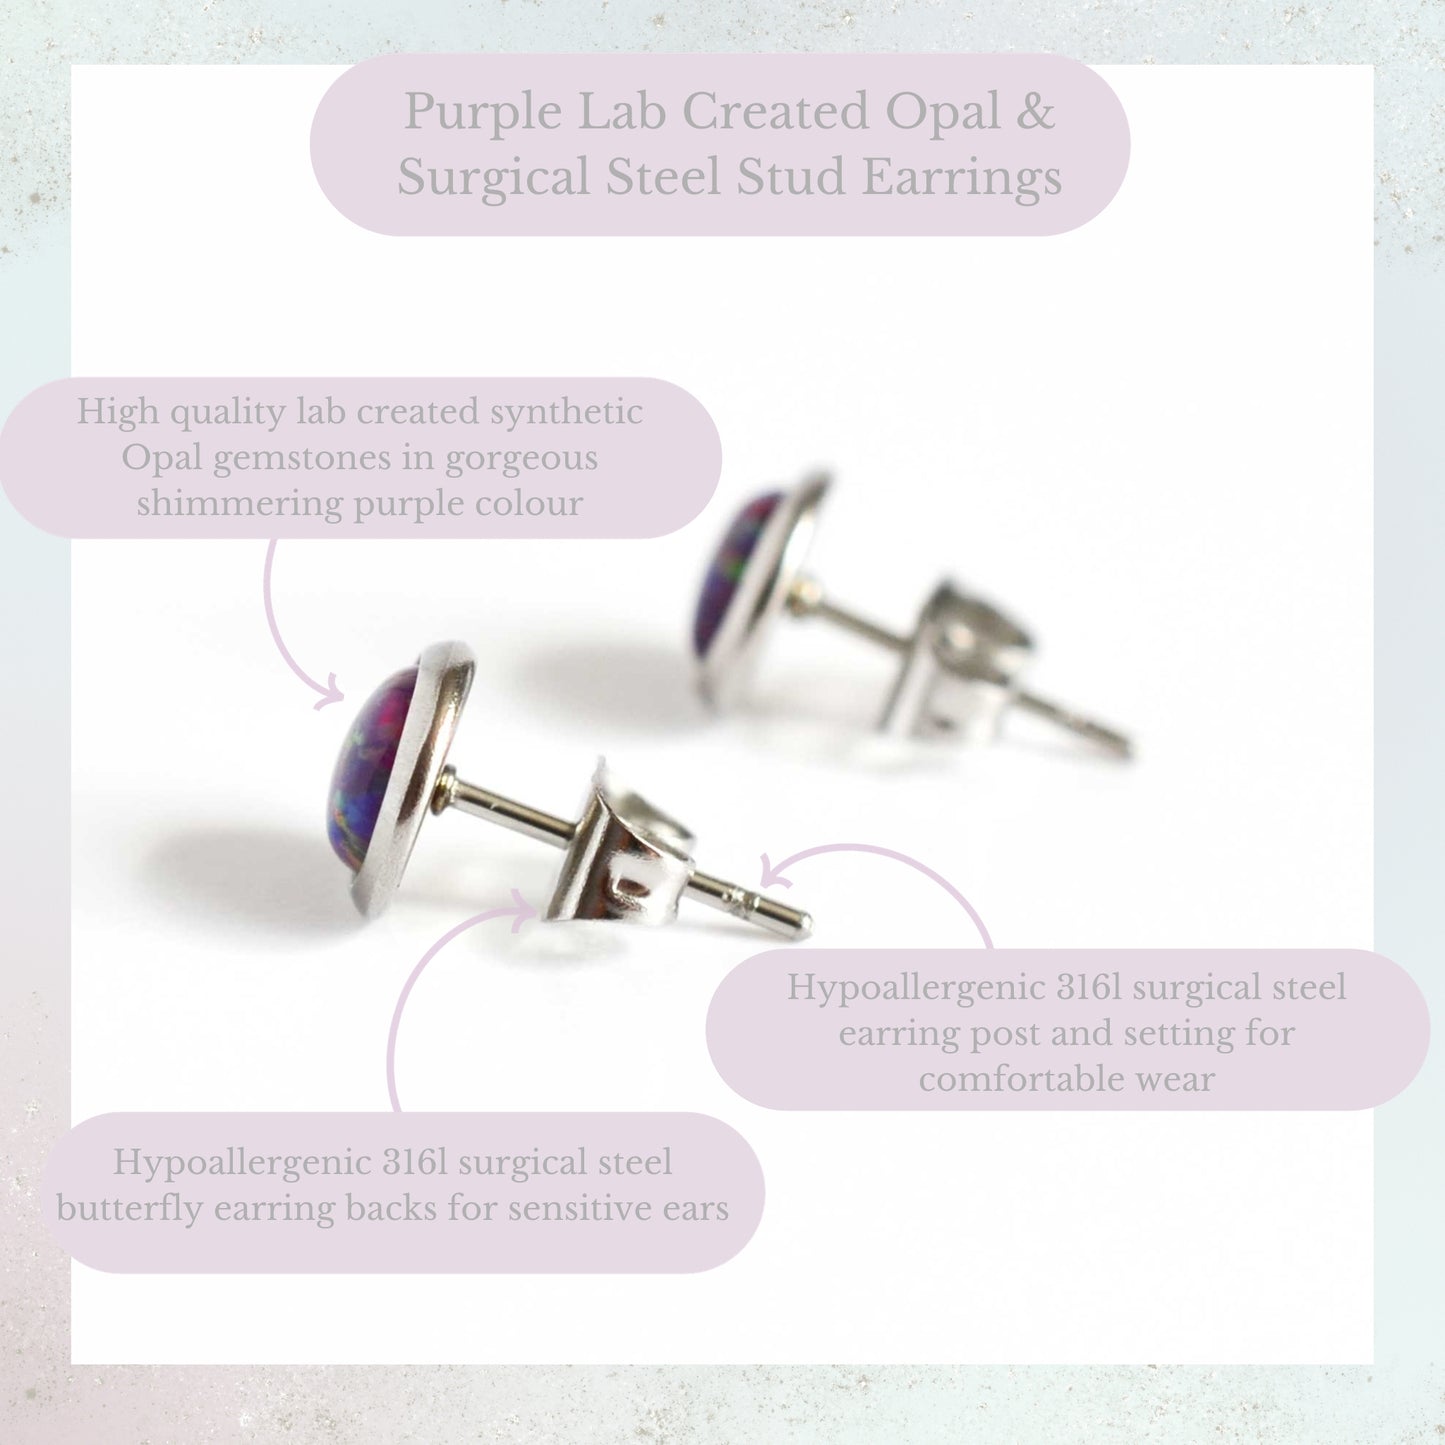 Purple Lab Created Opal & Surgical Steel Stud Earrings Product Information Graphic